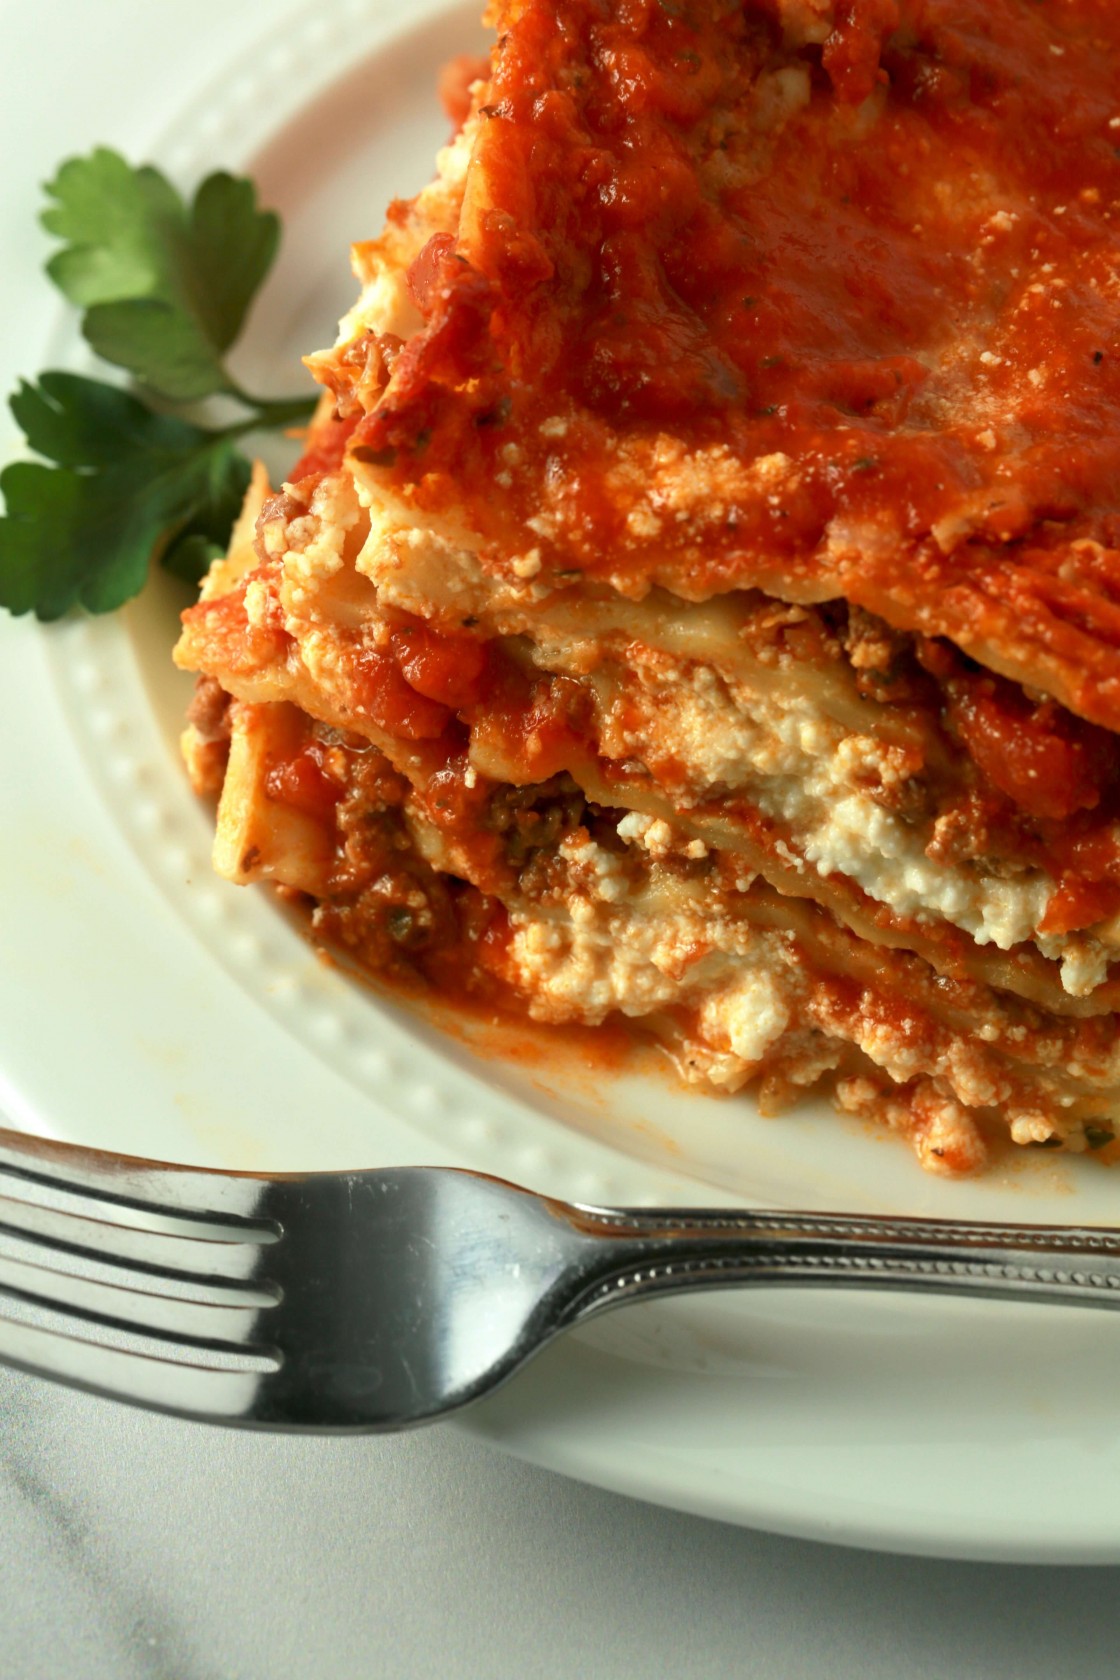 Classic 3 Cheese Lasagna With Meat Sauce Recipe 560x840@2x 